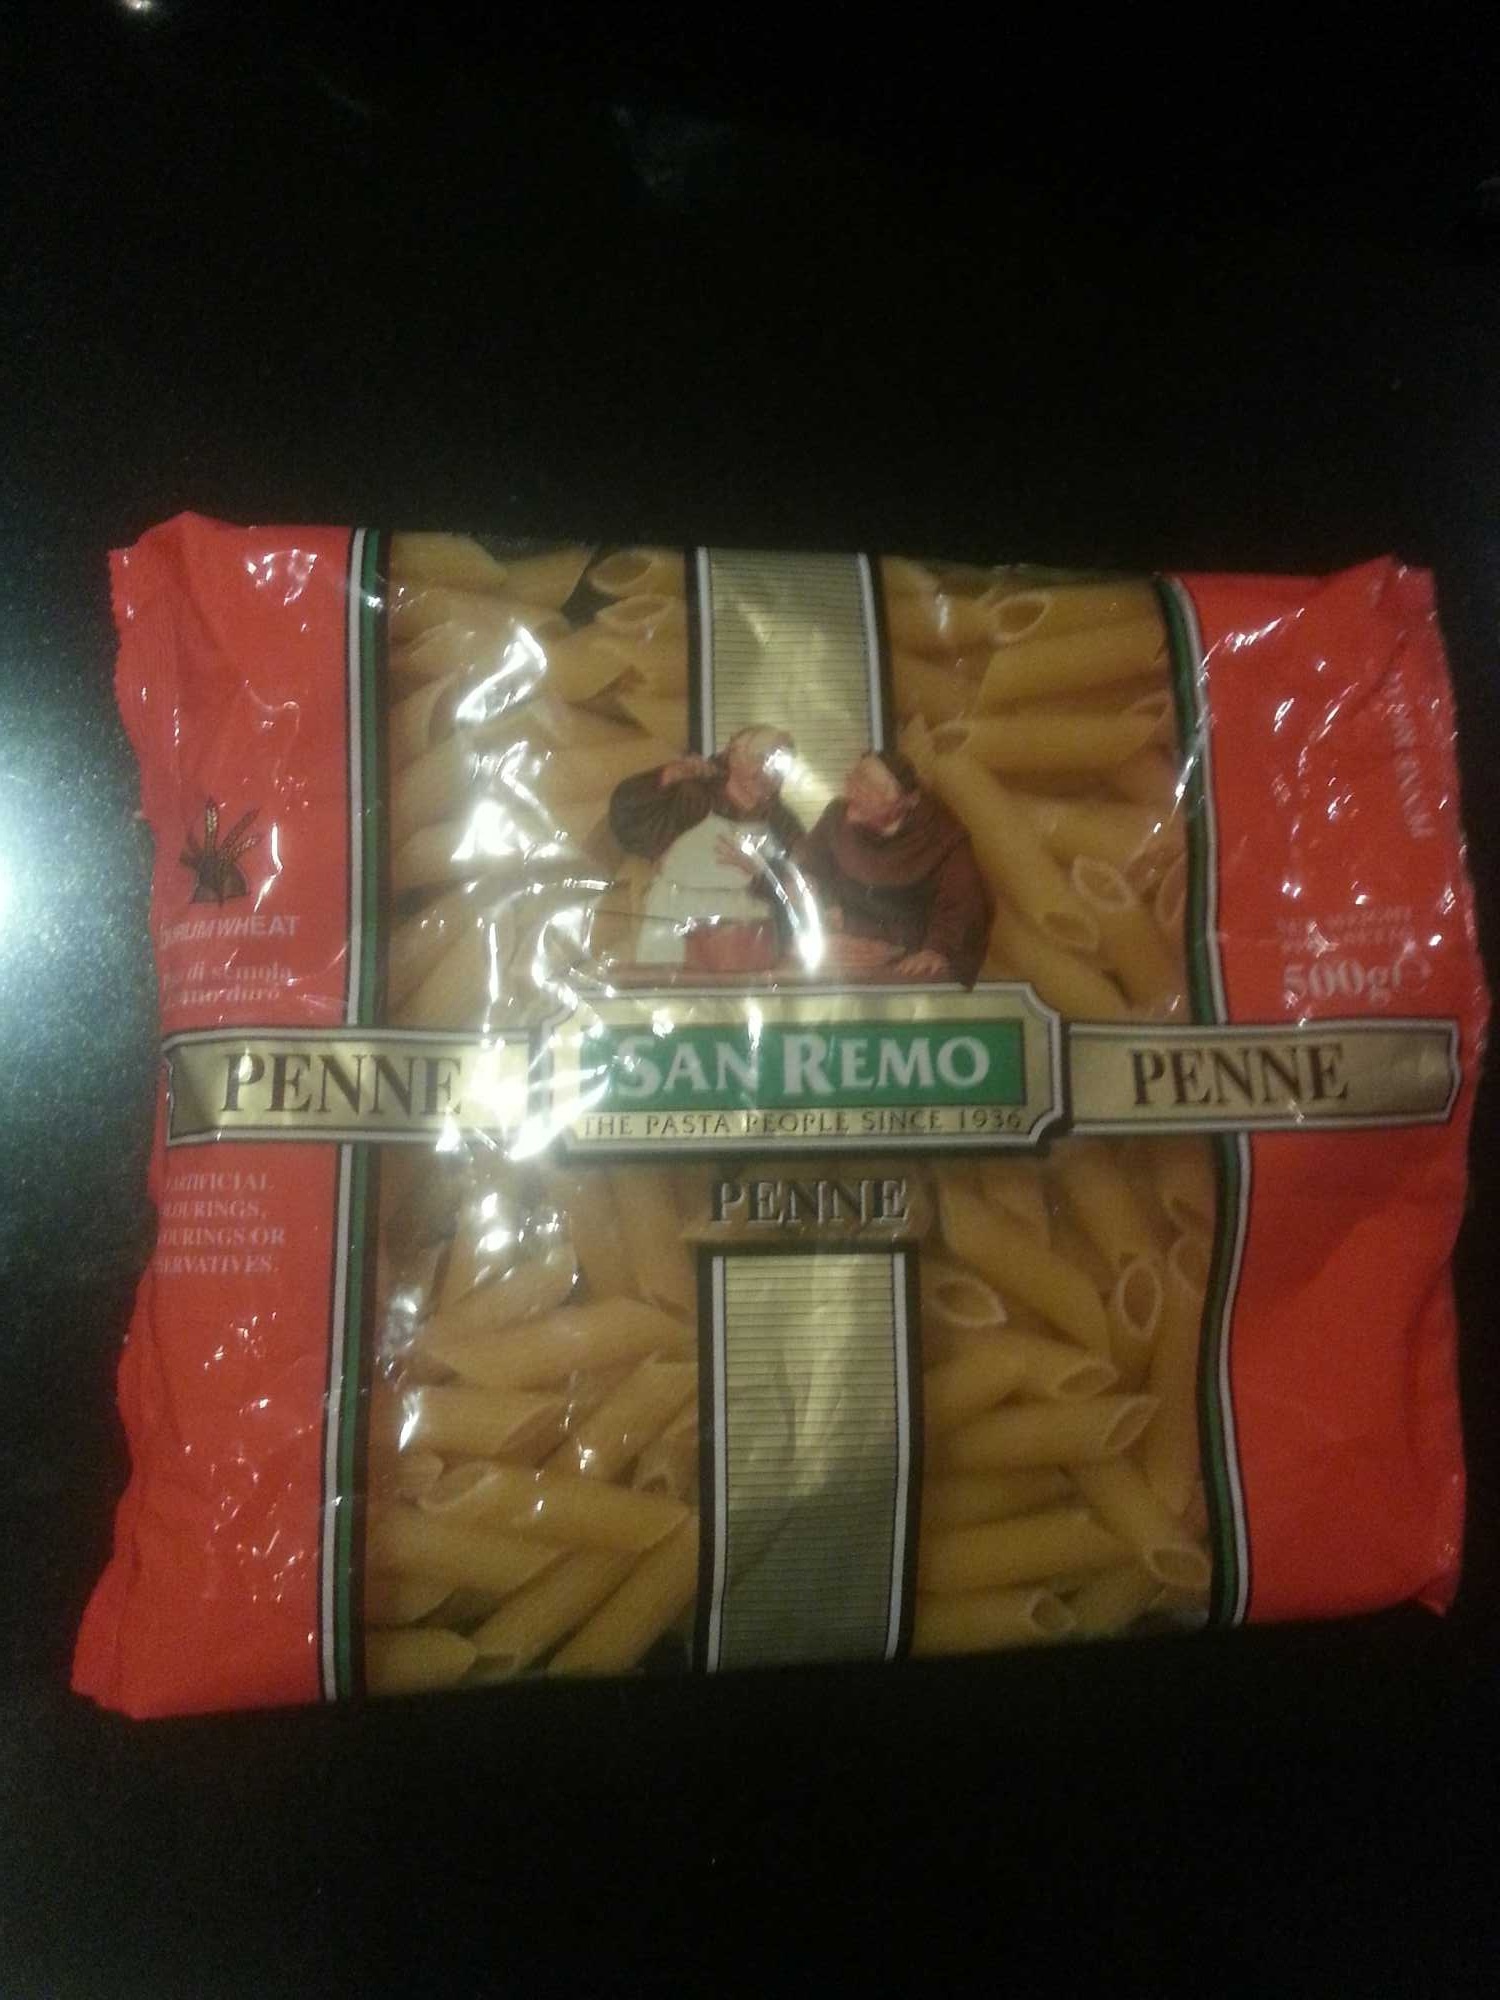 San remo Penne no.18 500g - Product